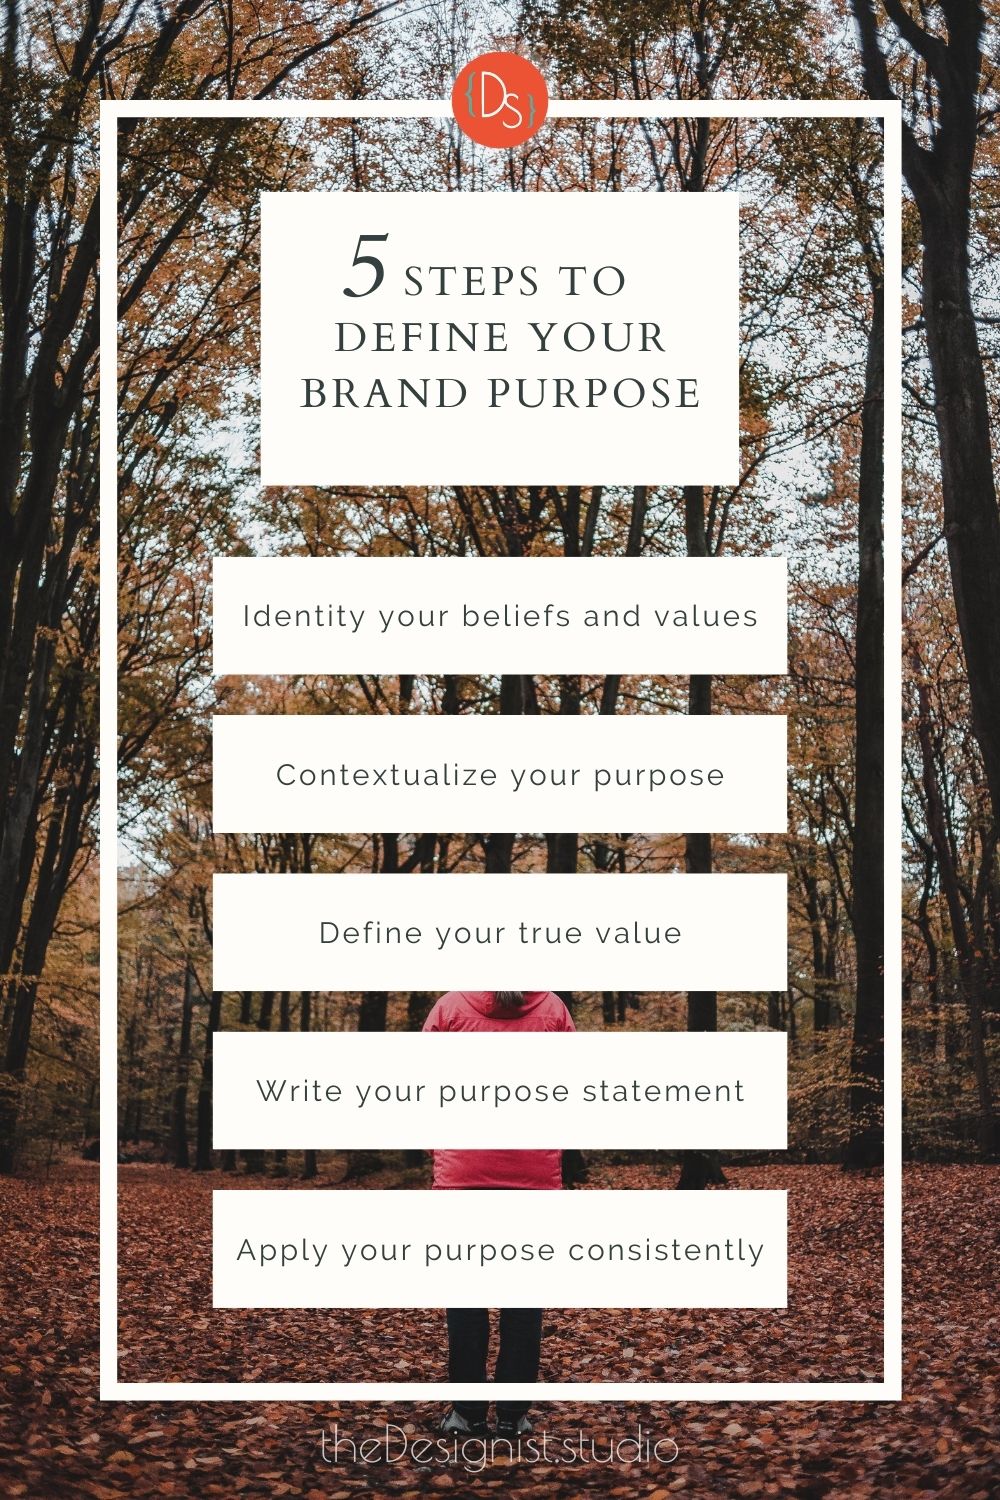 How to define your brand purpose